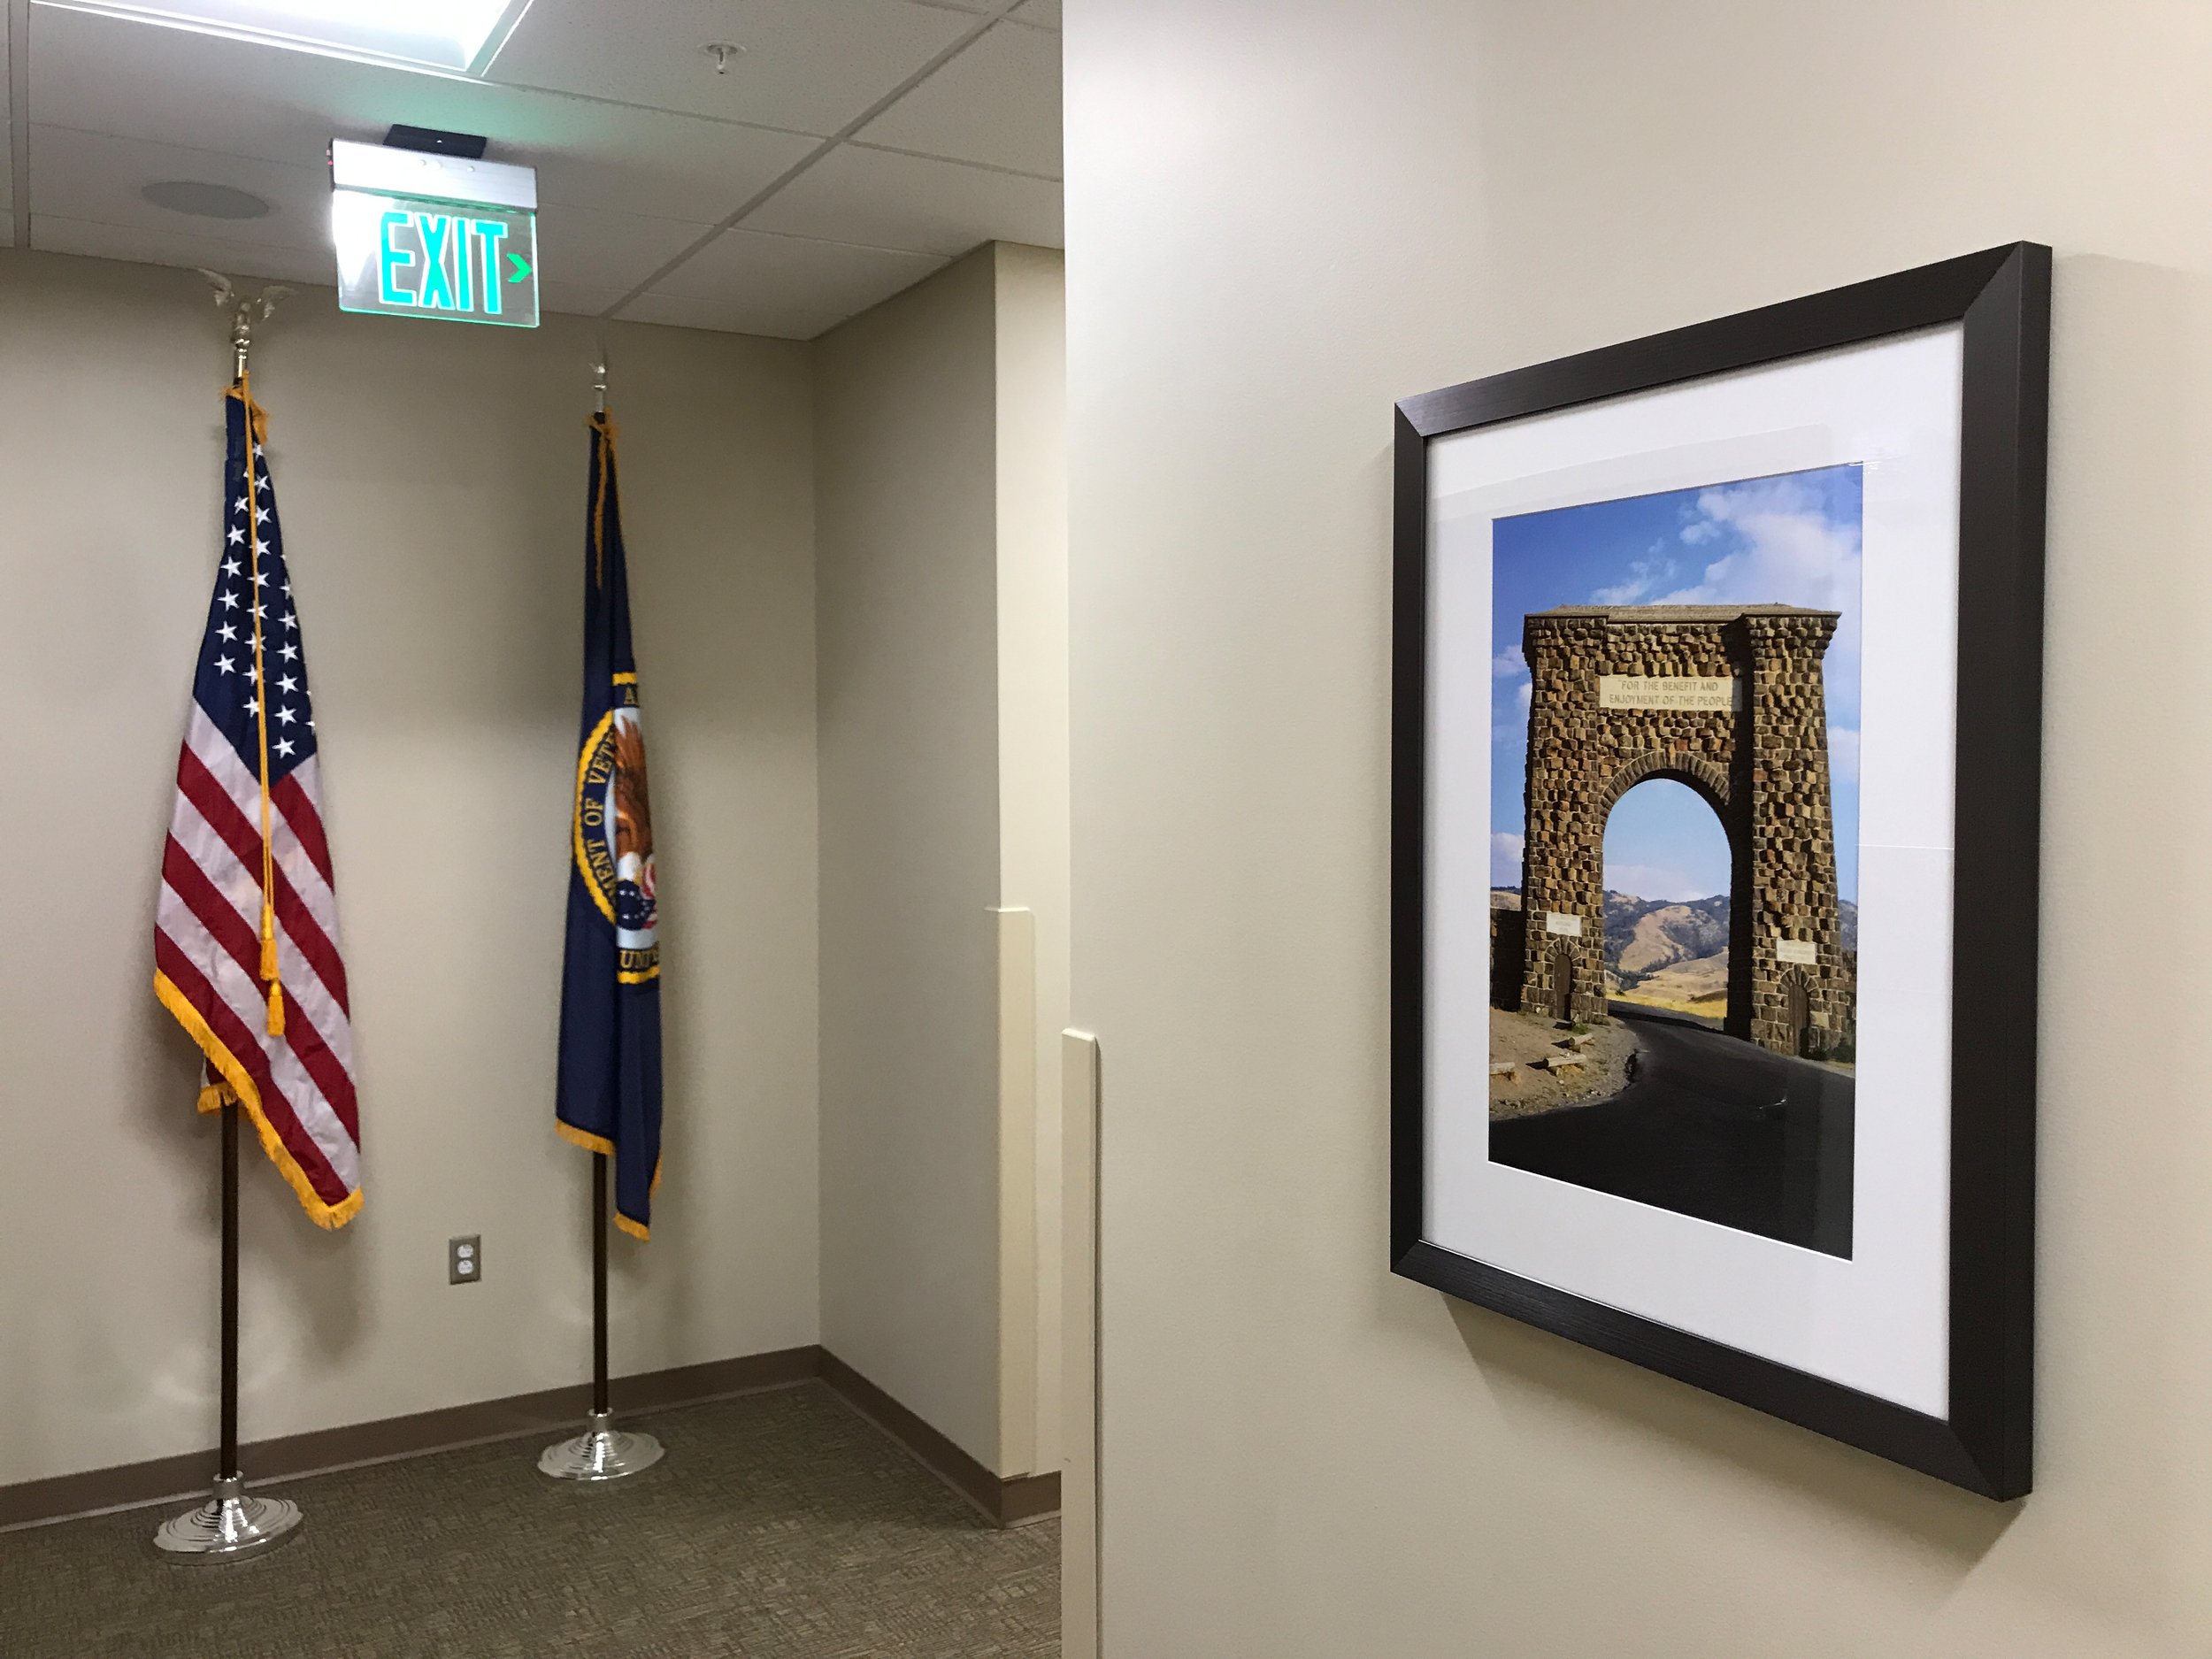 Peterson Picture's Government and GSA Framing services are specifically tailored for military bases, VA health care facilities and other government organizations. An example is this office building with two flags and floor stands, including an American flag and a Veterans flag. The opposite wall has a framed photo.